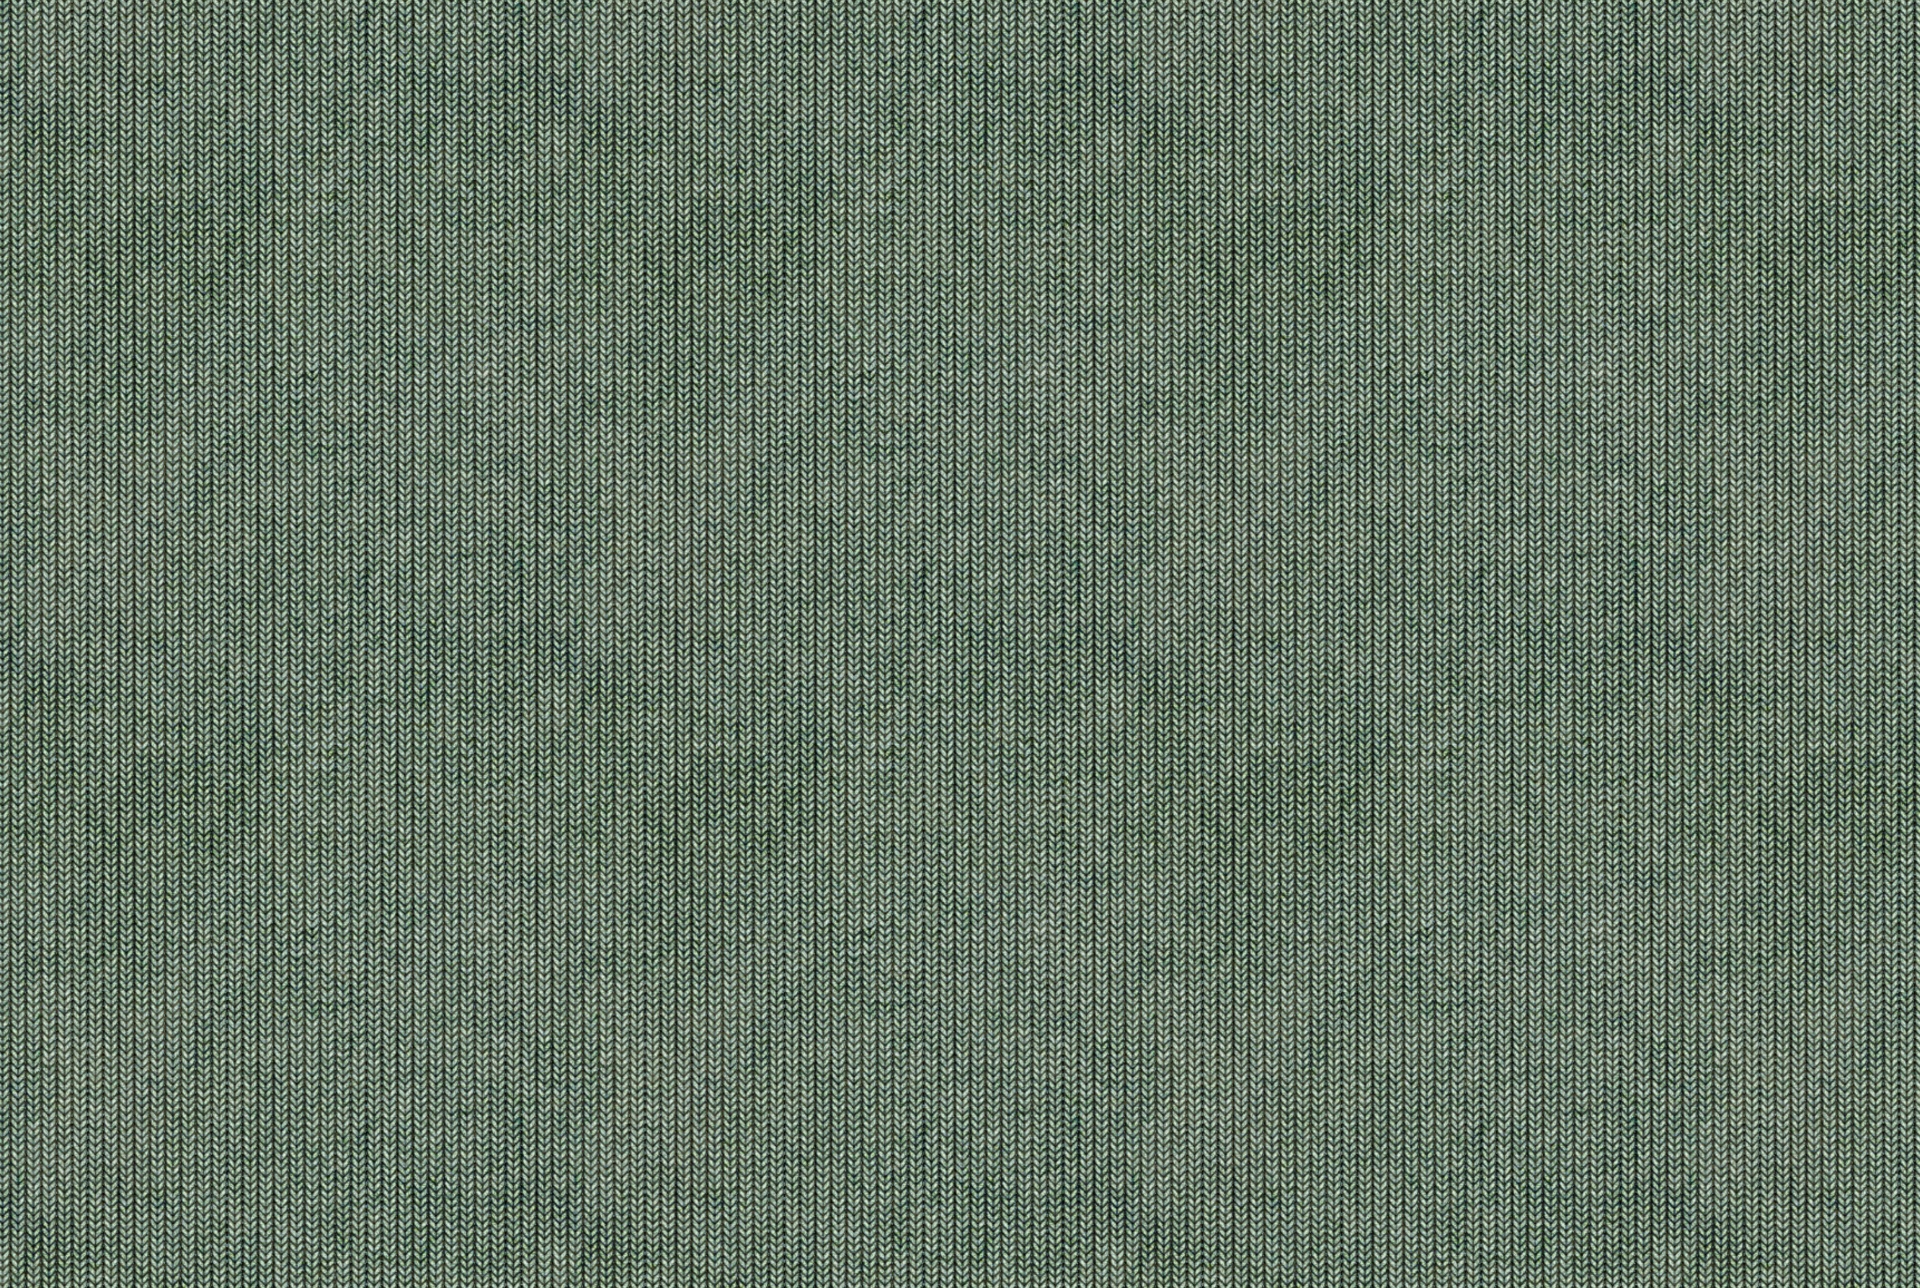 Knitted Texture Background